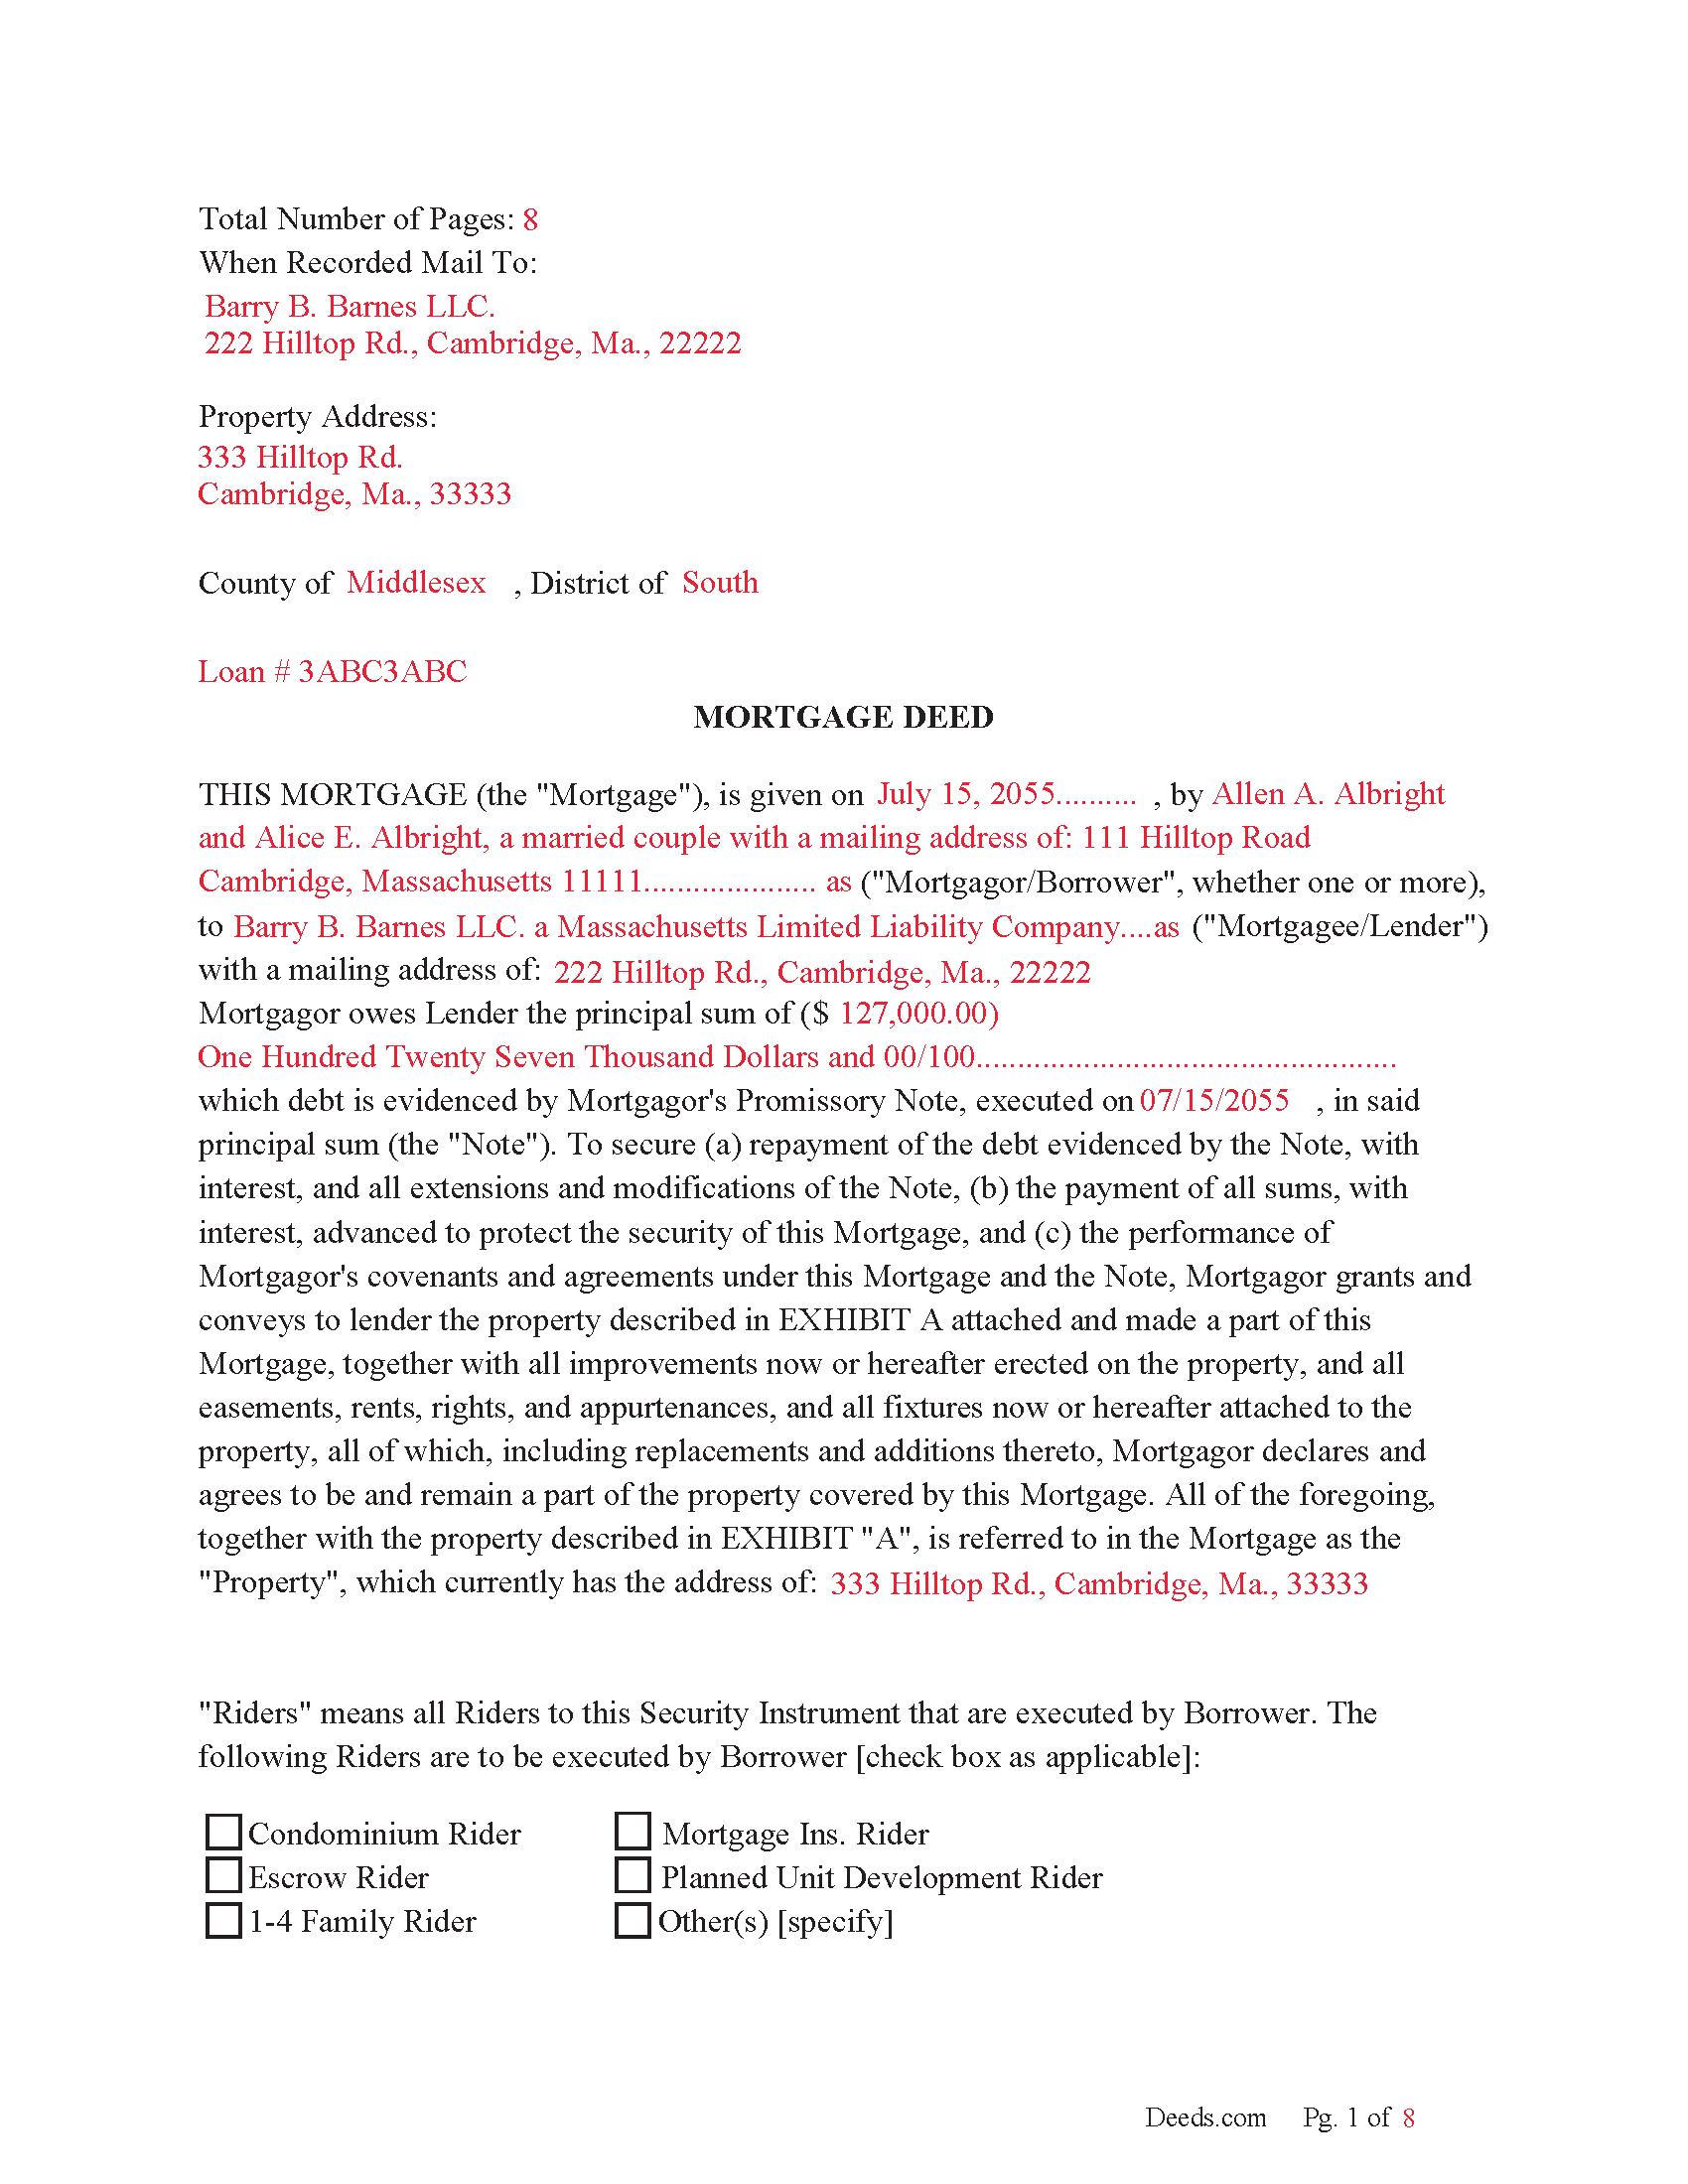 Completed Example of the Mortgage Deed Document